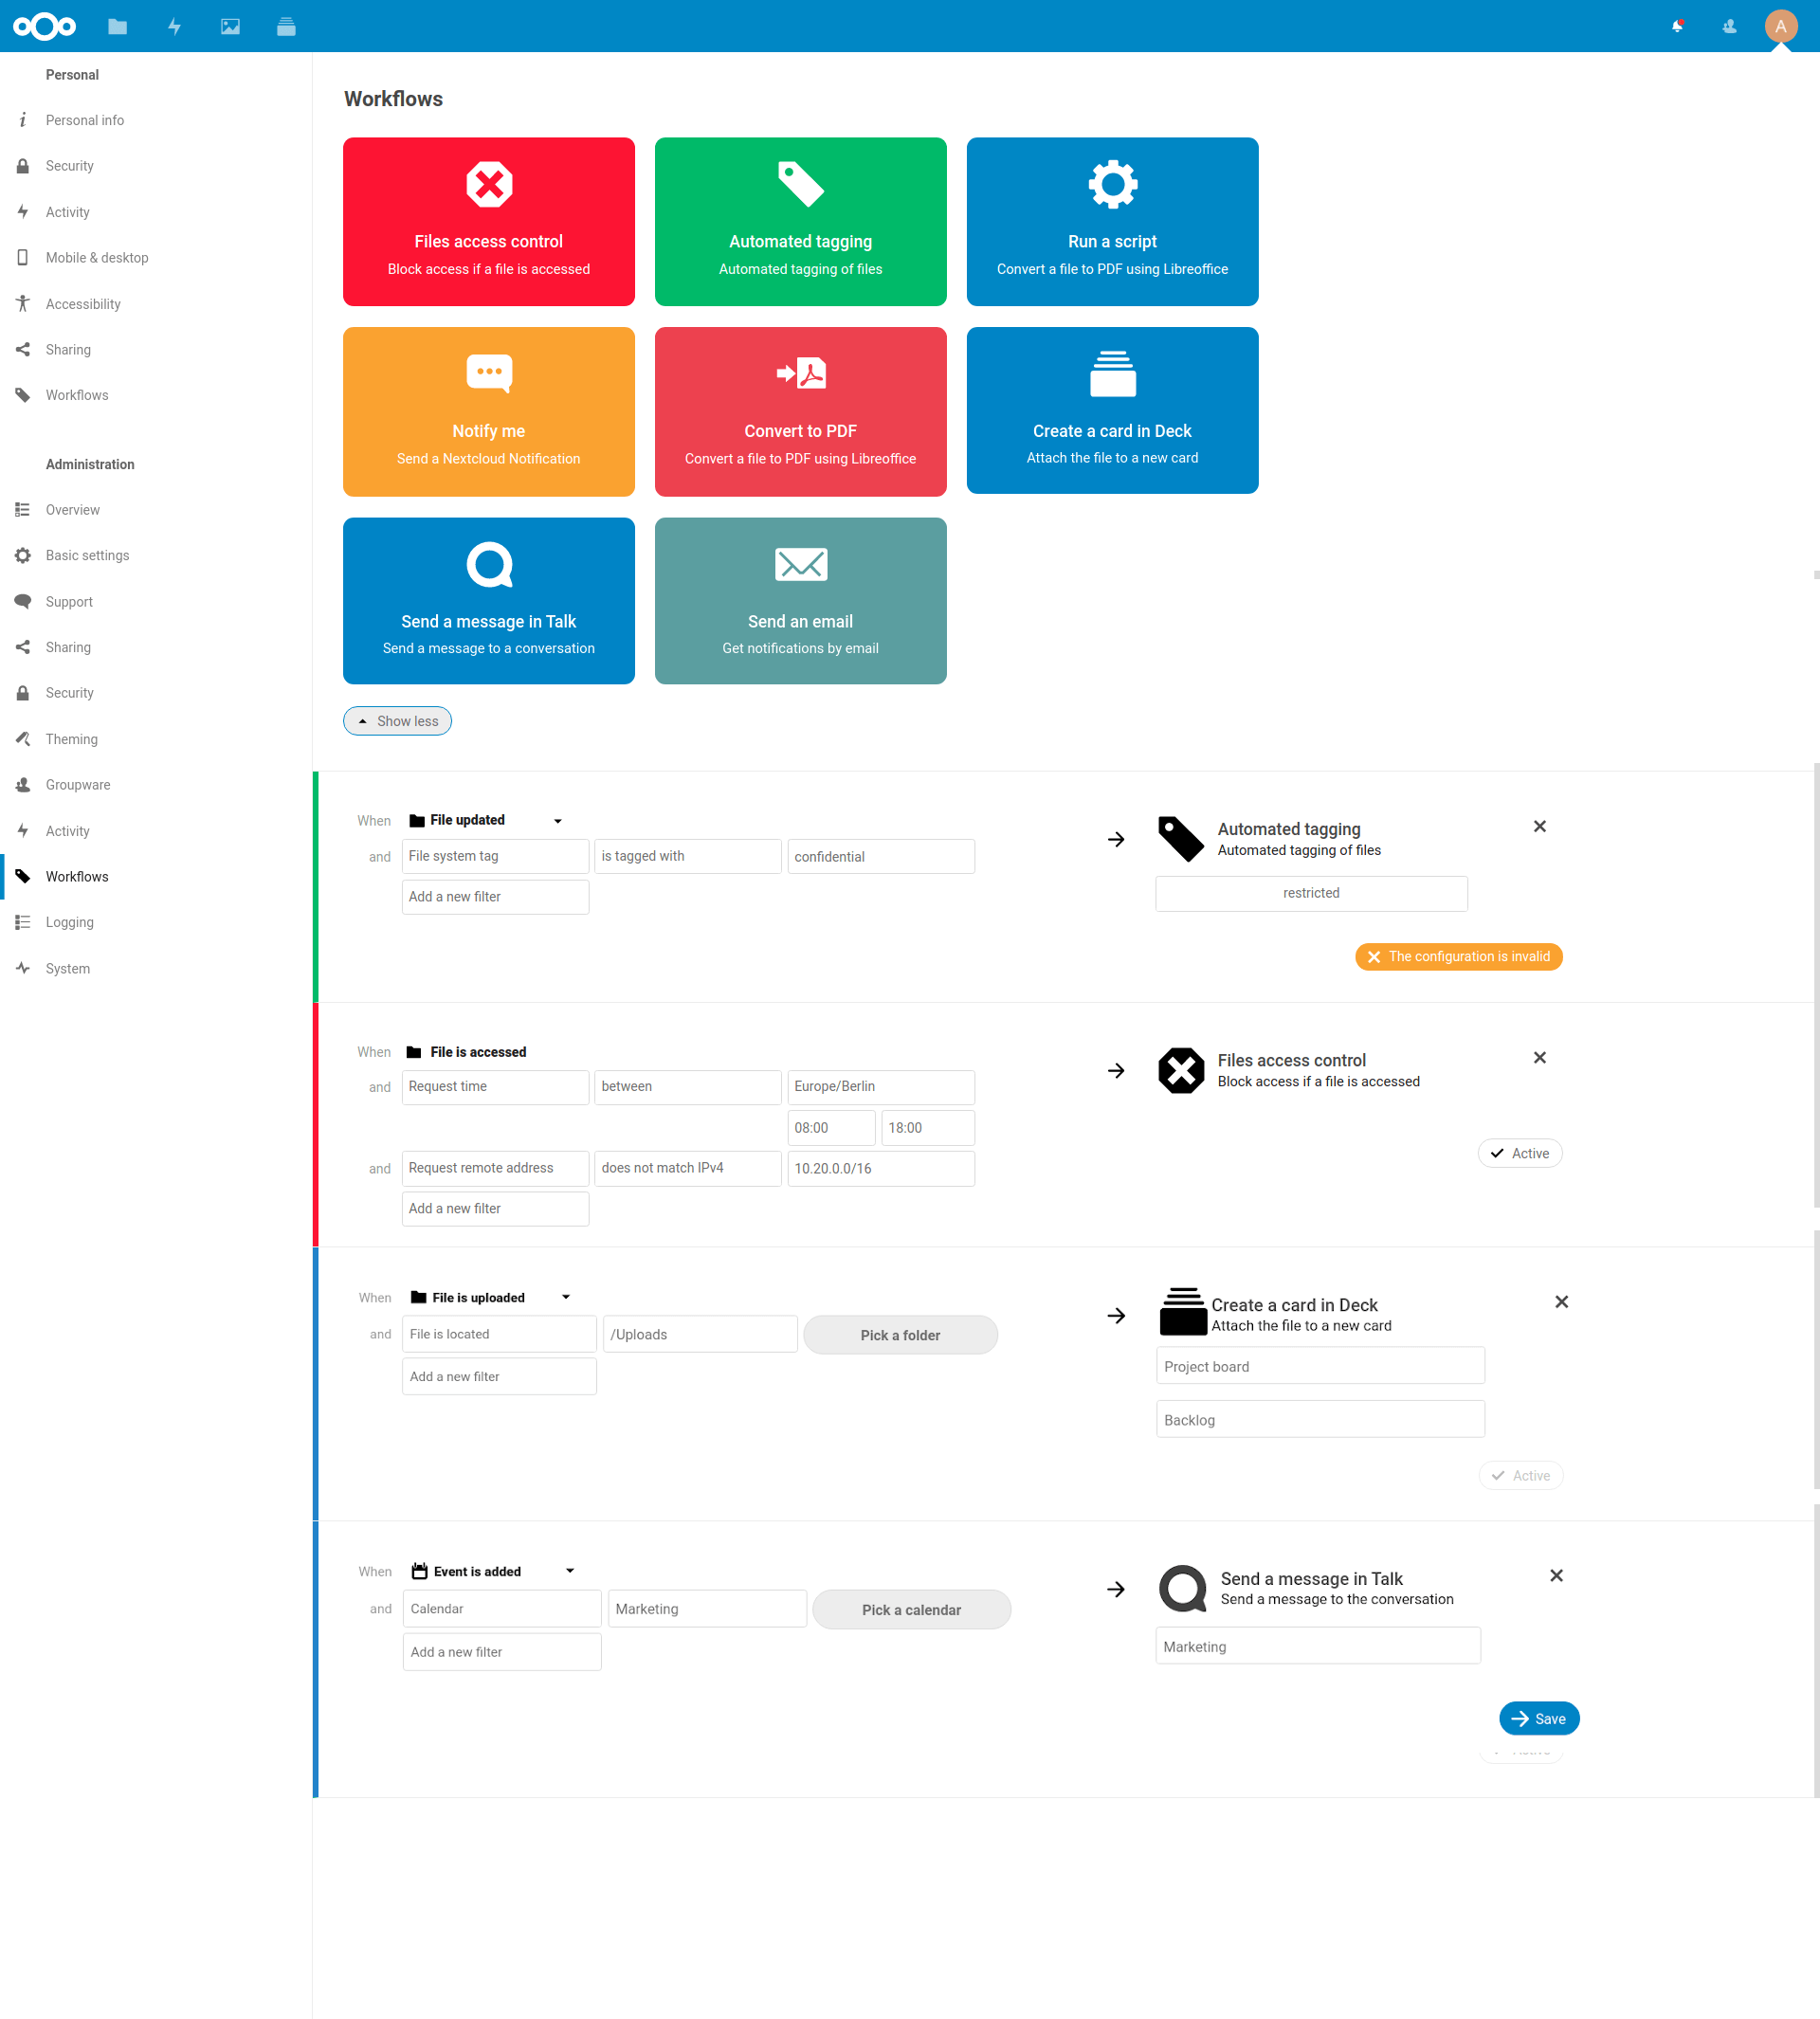 mockup (based on current state) of what NC Flow should look like by release time